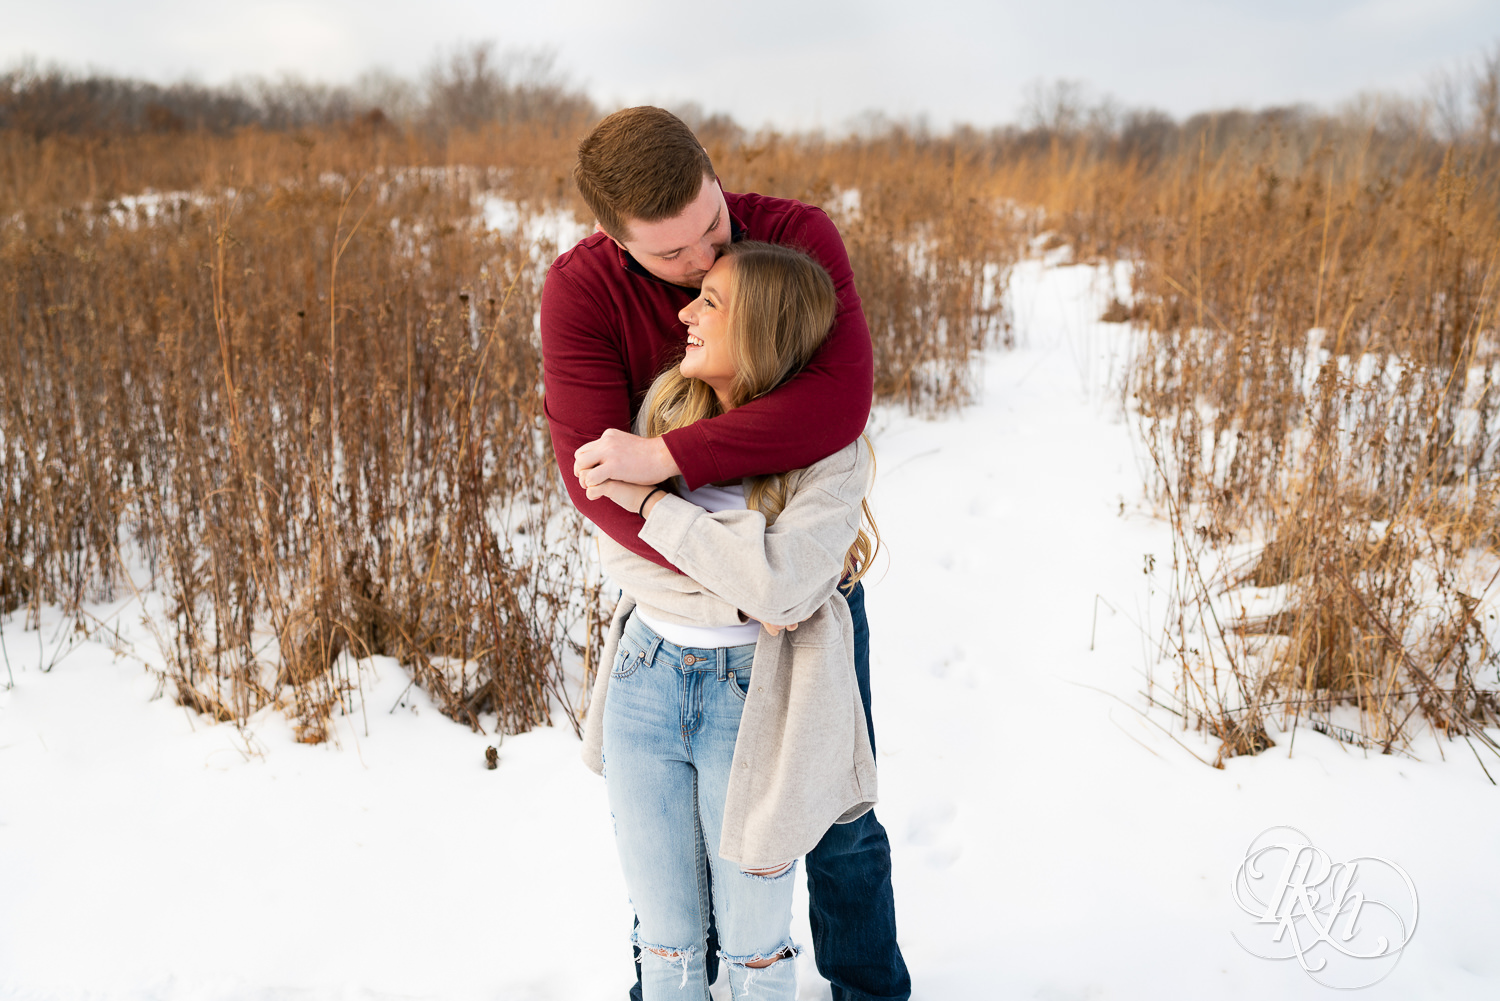 A couple stands in the snow hugging and smiling at one another. The man kisses the woman's forehead.